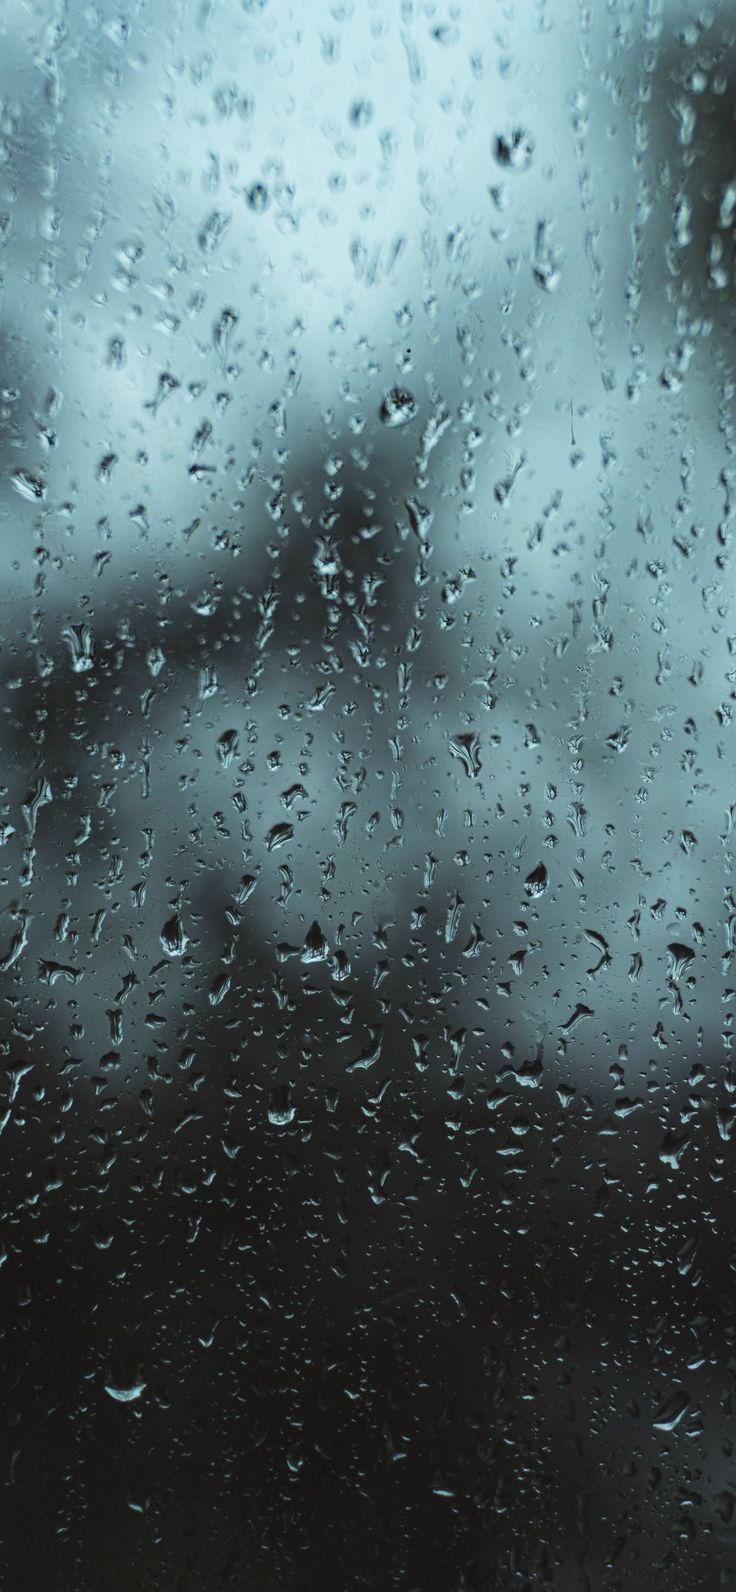 Raindrops on a window with a dark sky in the background - Rain